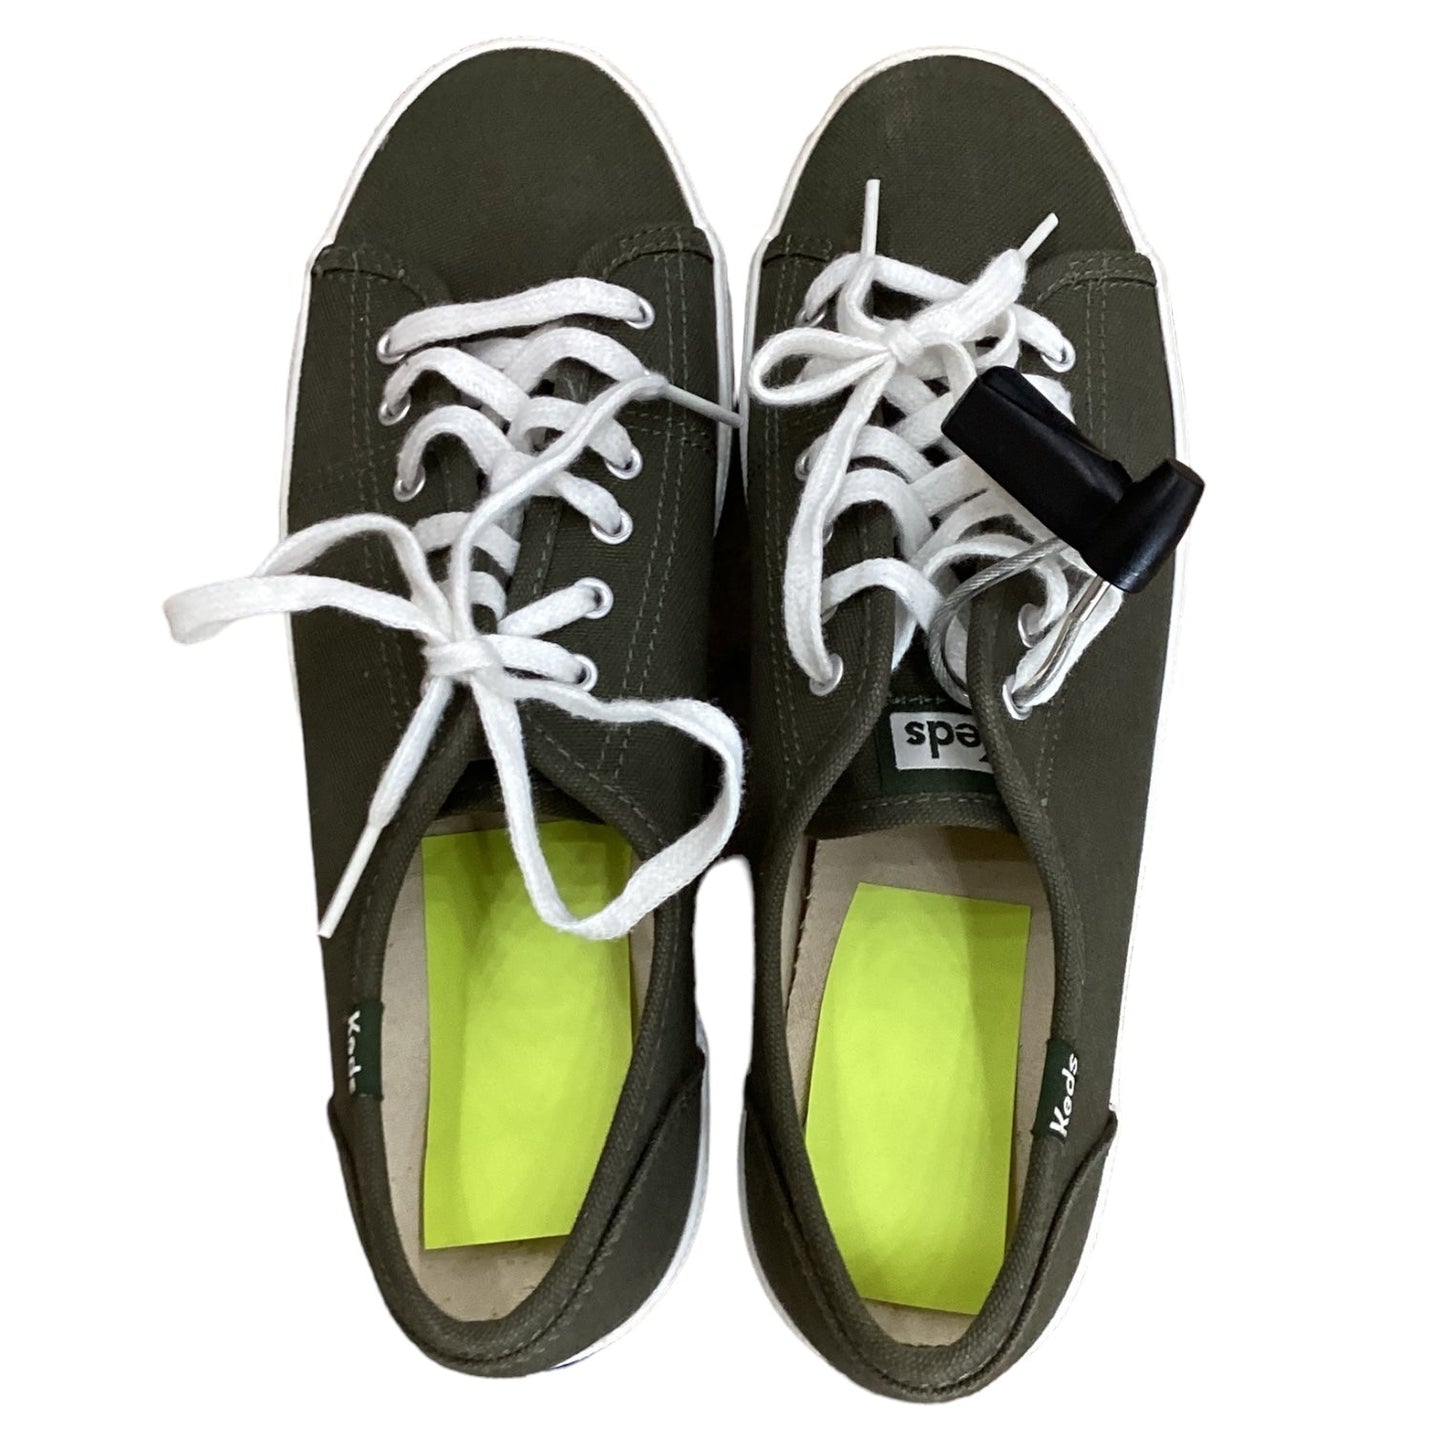 Green Shoes Flats Keds, Size 7.5